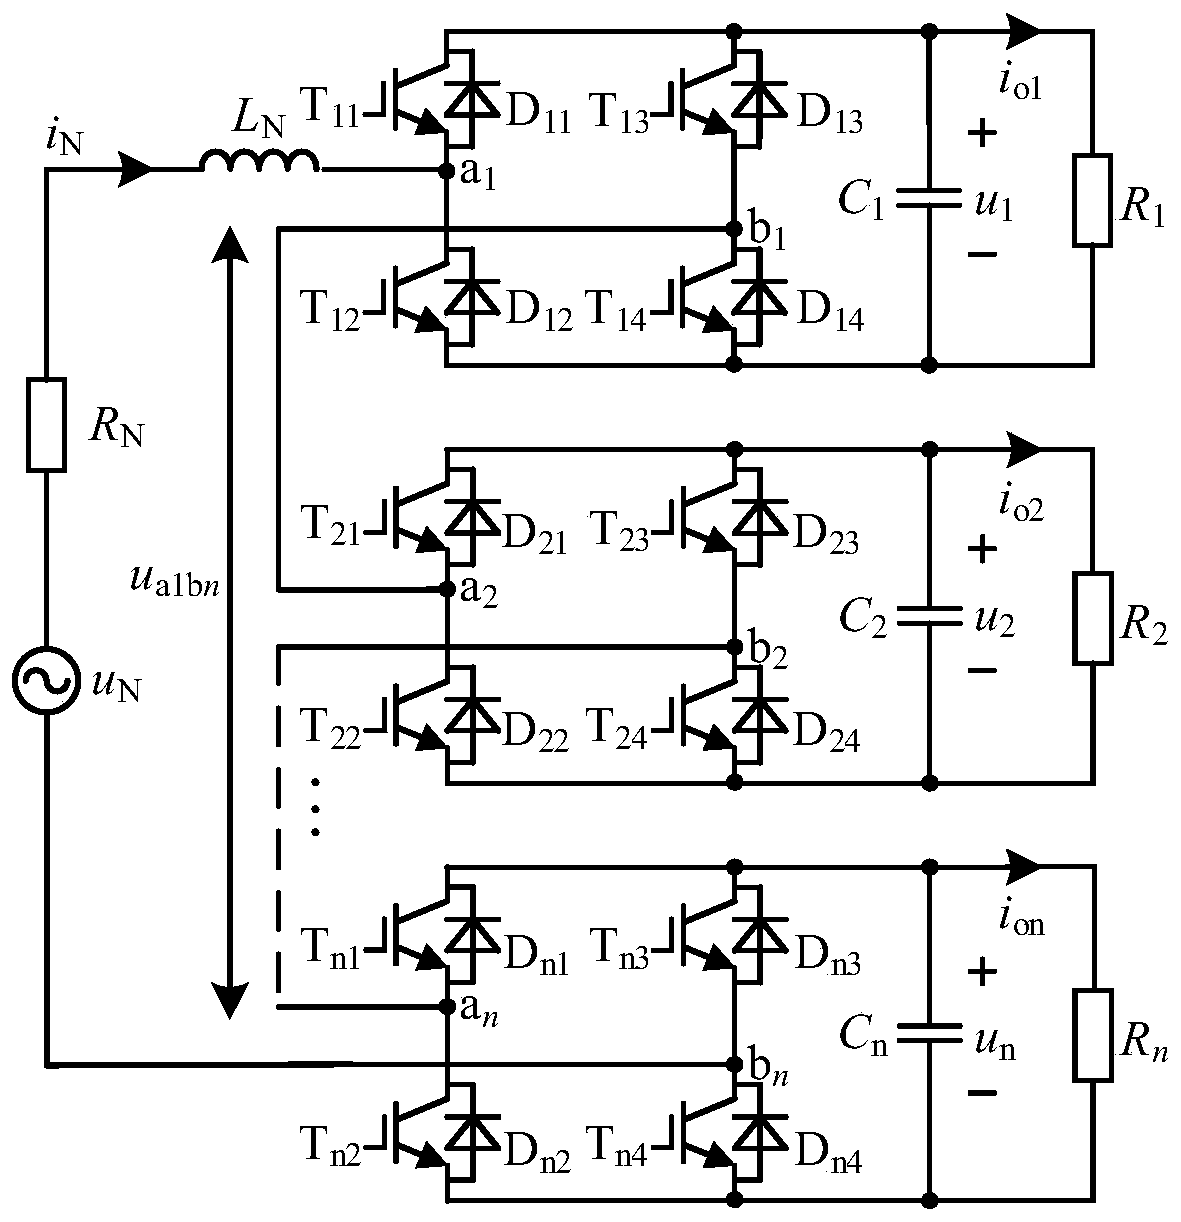 A Fault Diagnosis Method for Switch Tube Open Circuit of Single-phase Cascaded H-bridge Rectifier